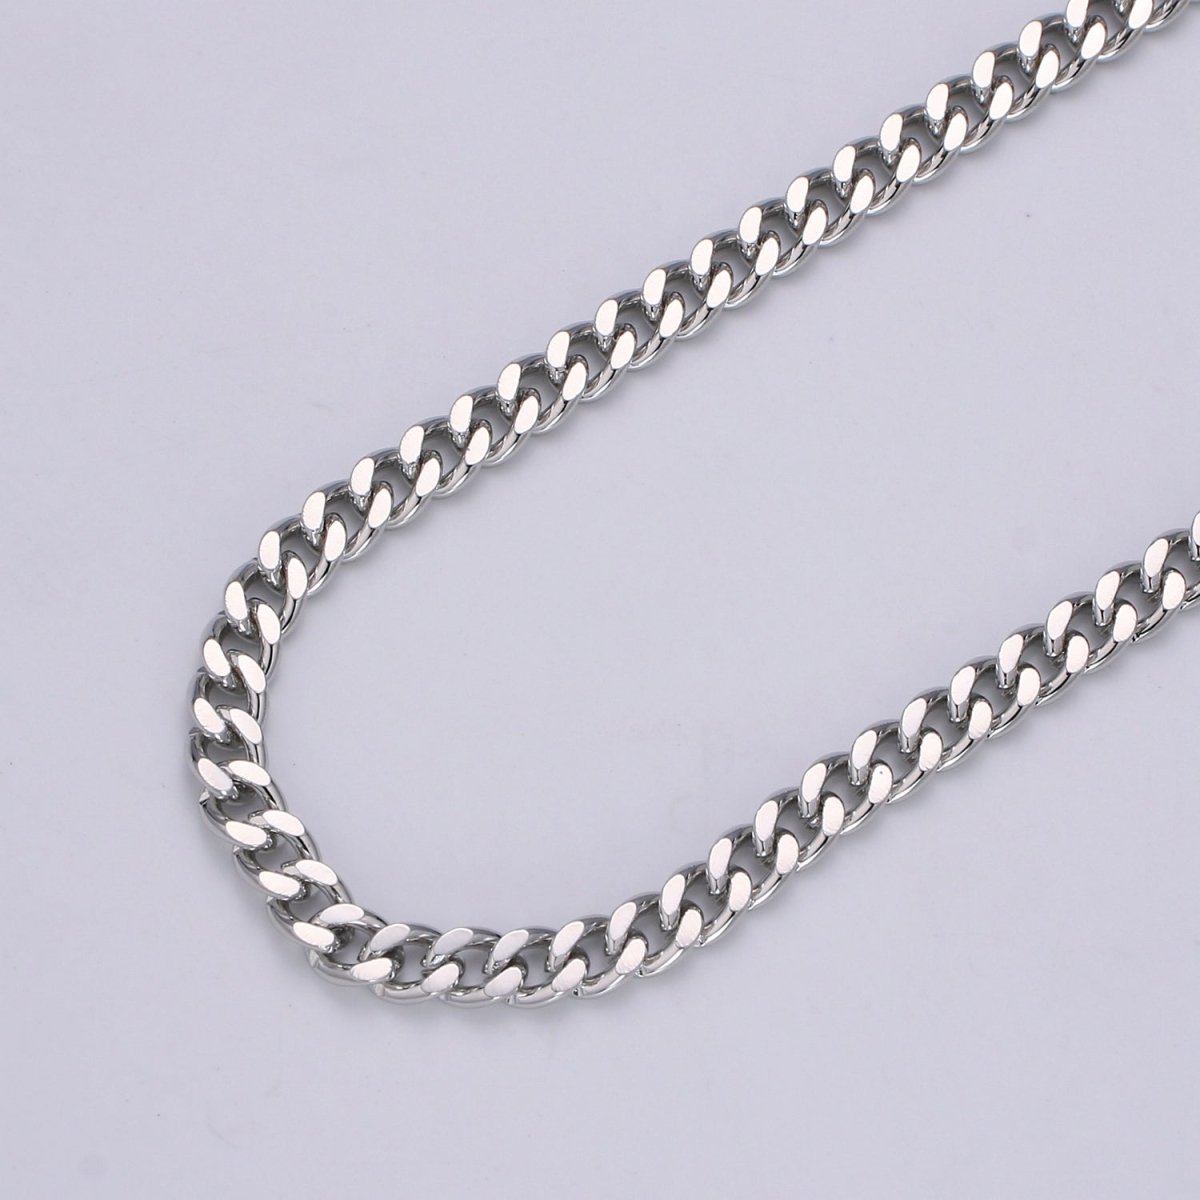 24K White Gold Filled Unfinished Chain Gold Cuban CURB Chain by Yard, Wholesale Bulk Roll Chain For Jewelry Making | ROLL-499, ROLL-500 Clearance Pricing - DLUXCA